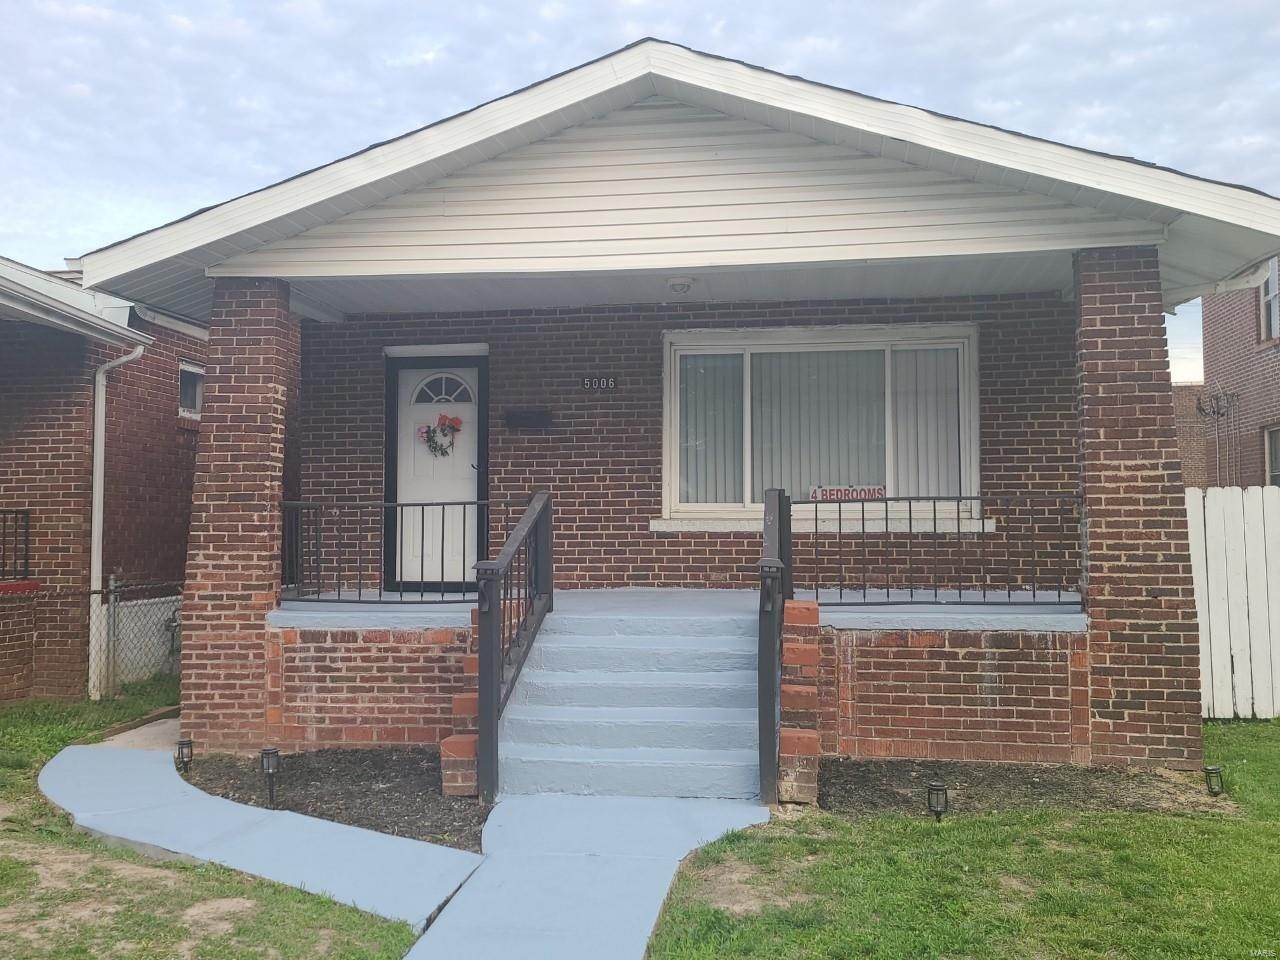 Property for Sale at 5006 Ruskin St. Louis, Missouri 63115 United States